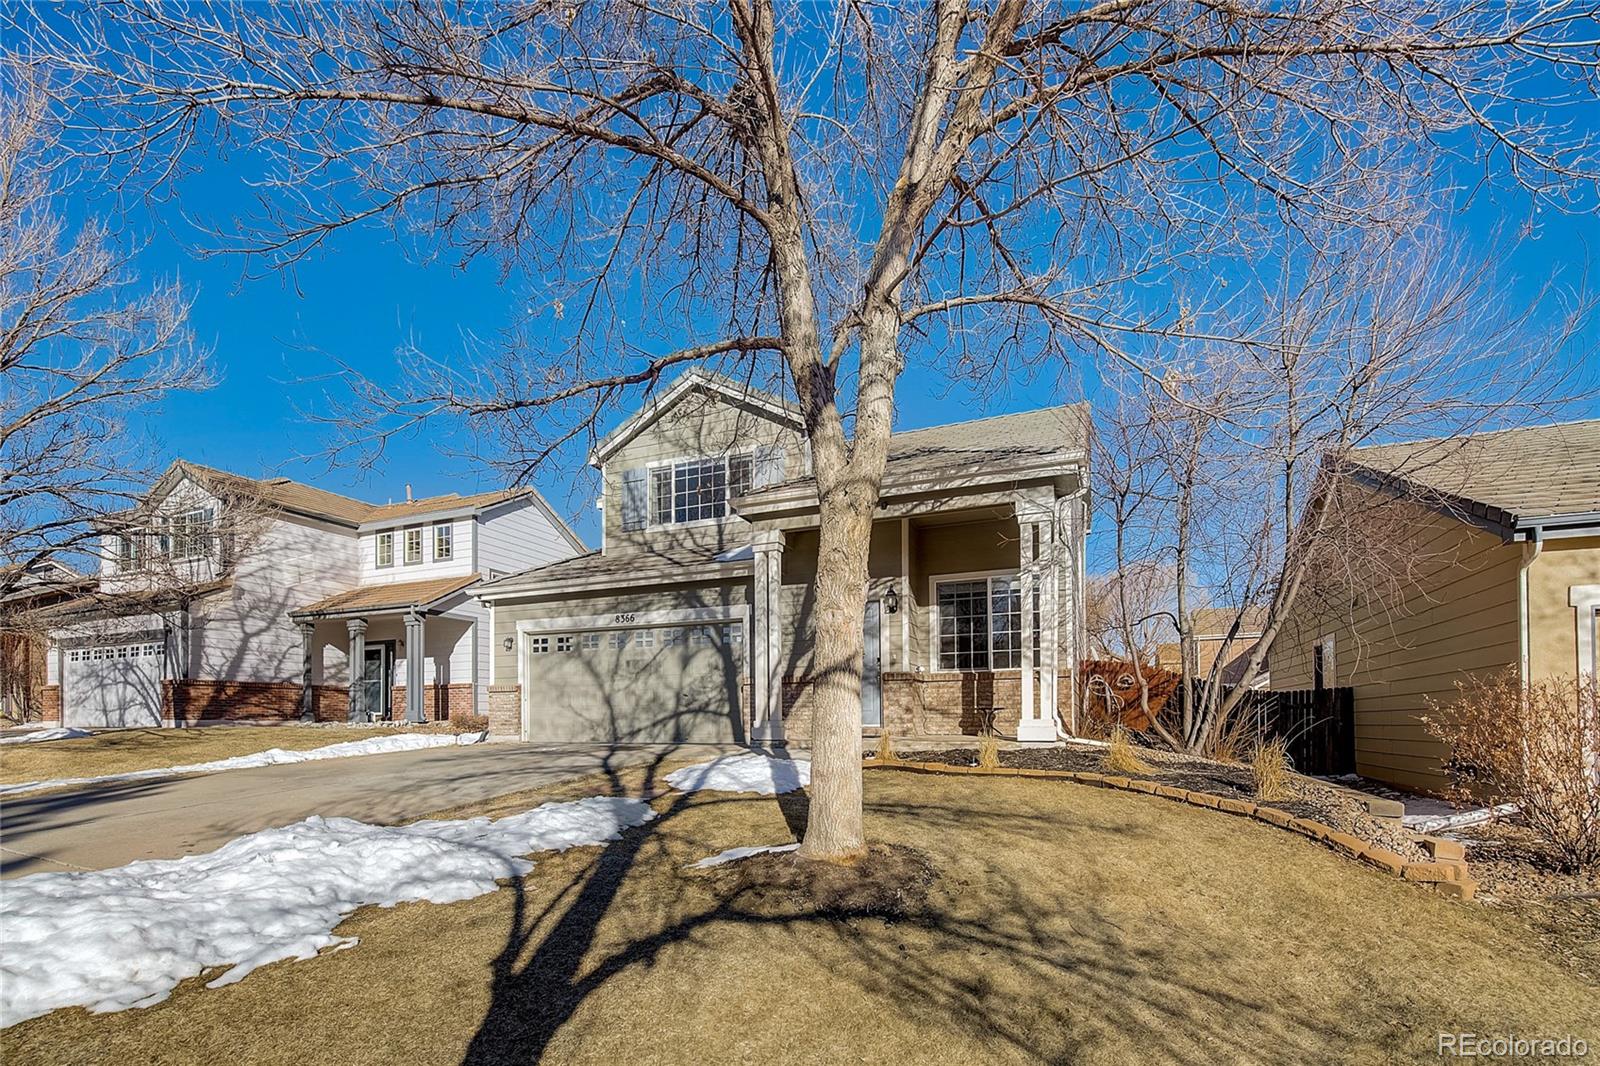 Report Image for 8366 S Reed Street,Littleton, Colorado